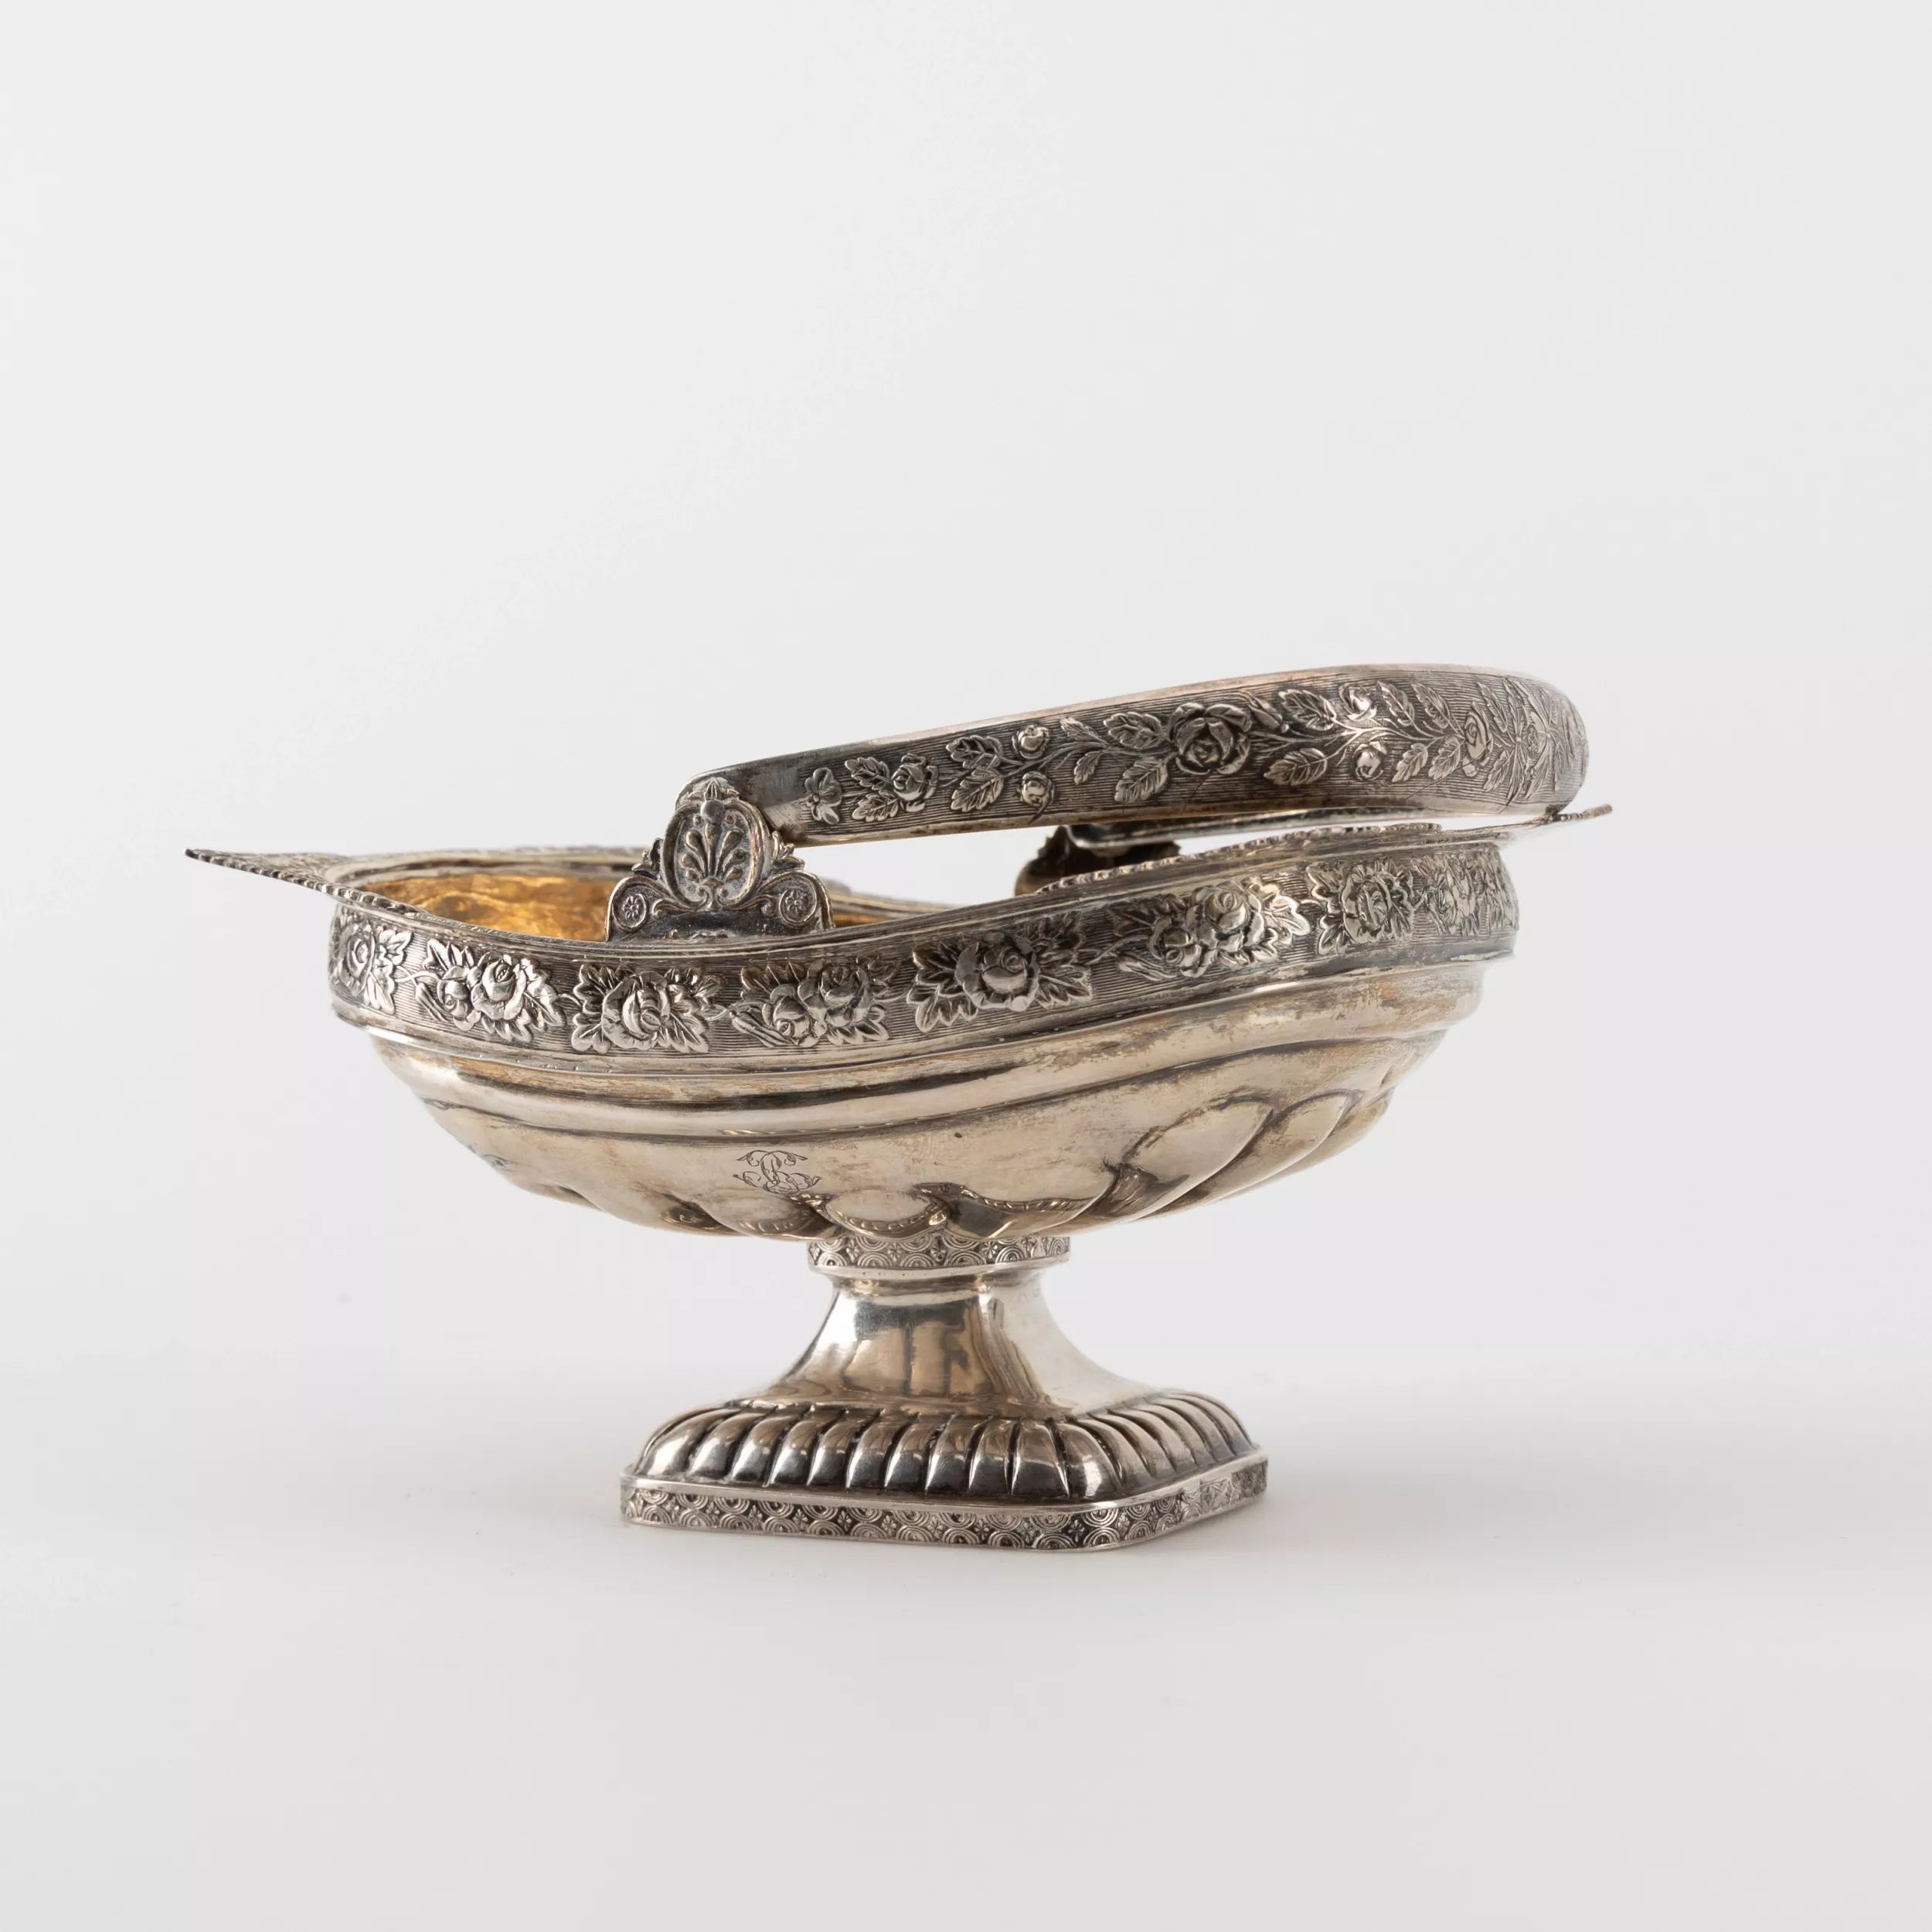 Russian silver candy bowl. St. Petersburg 1837 - Image 2 of 4